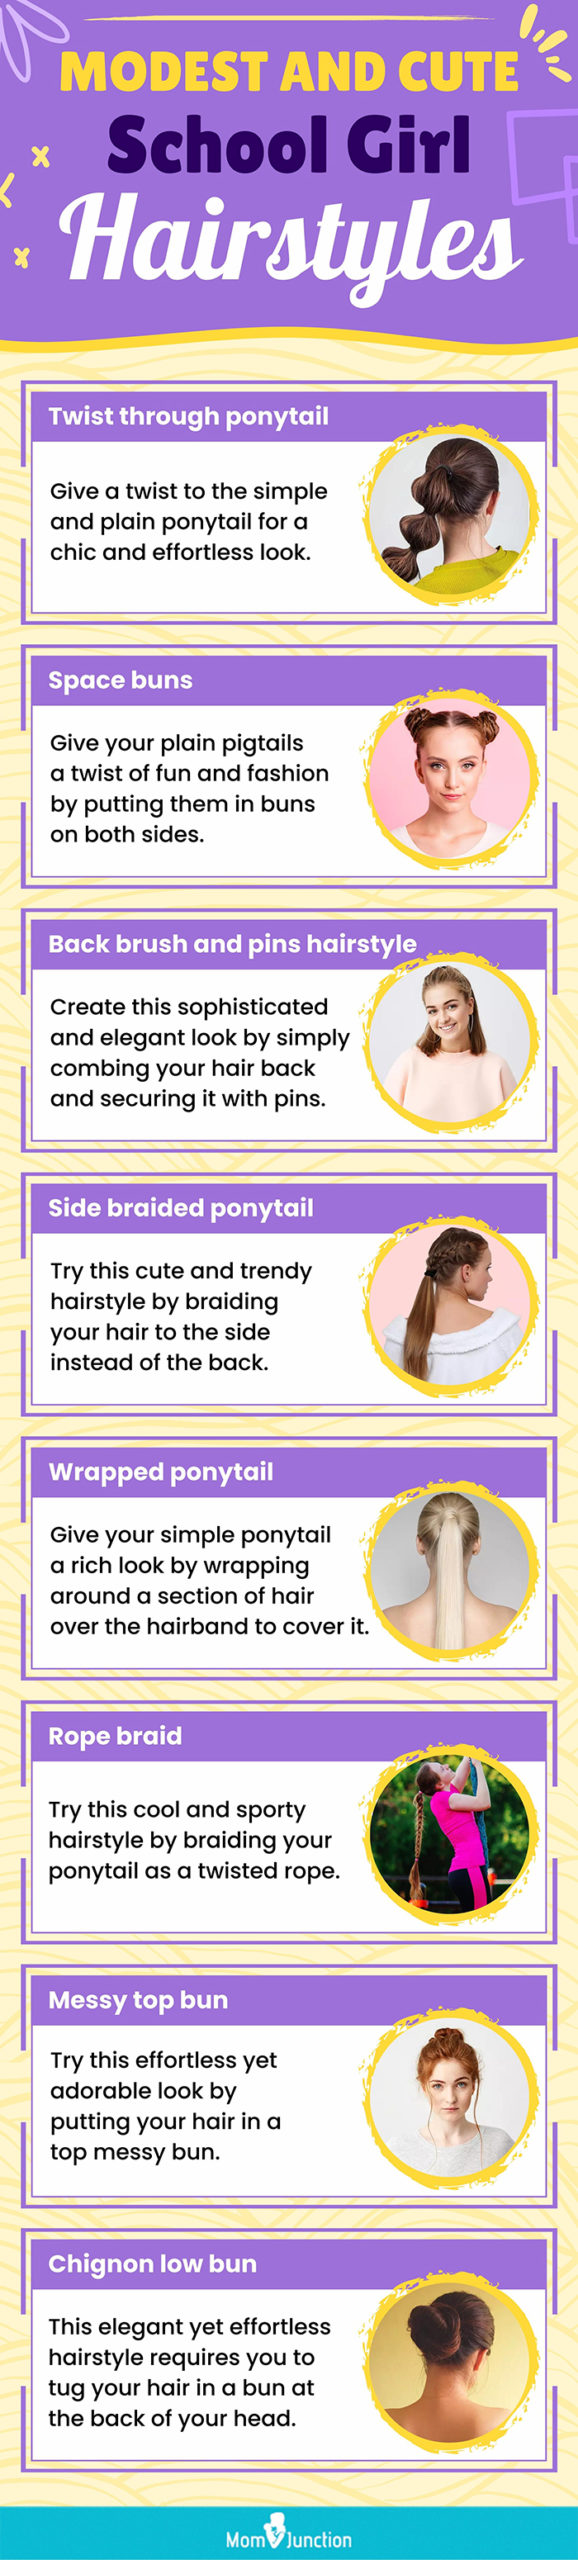 modest and cute school girl hairstyles (infographic)